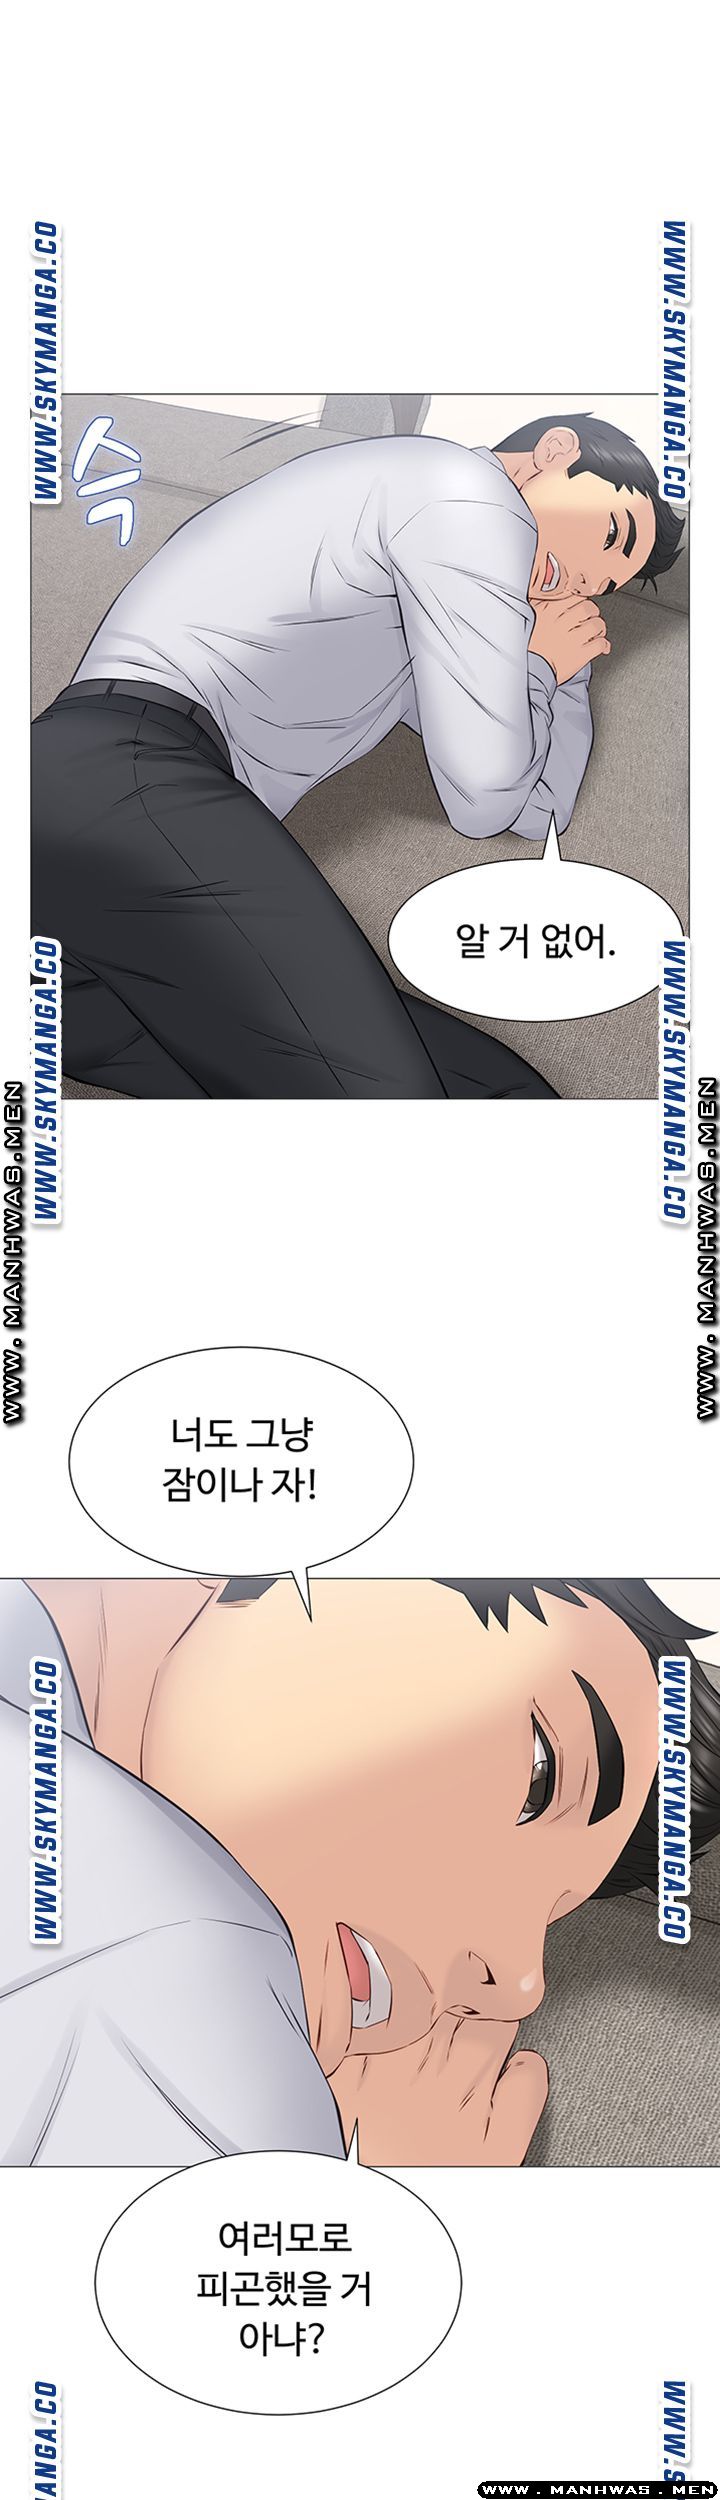 Gamble Raw - Chapter 32 Page 41